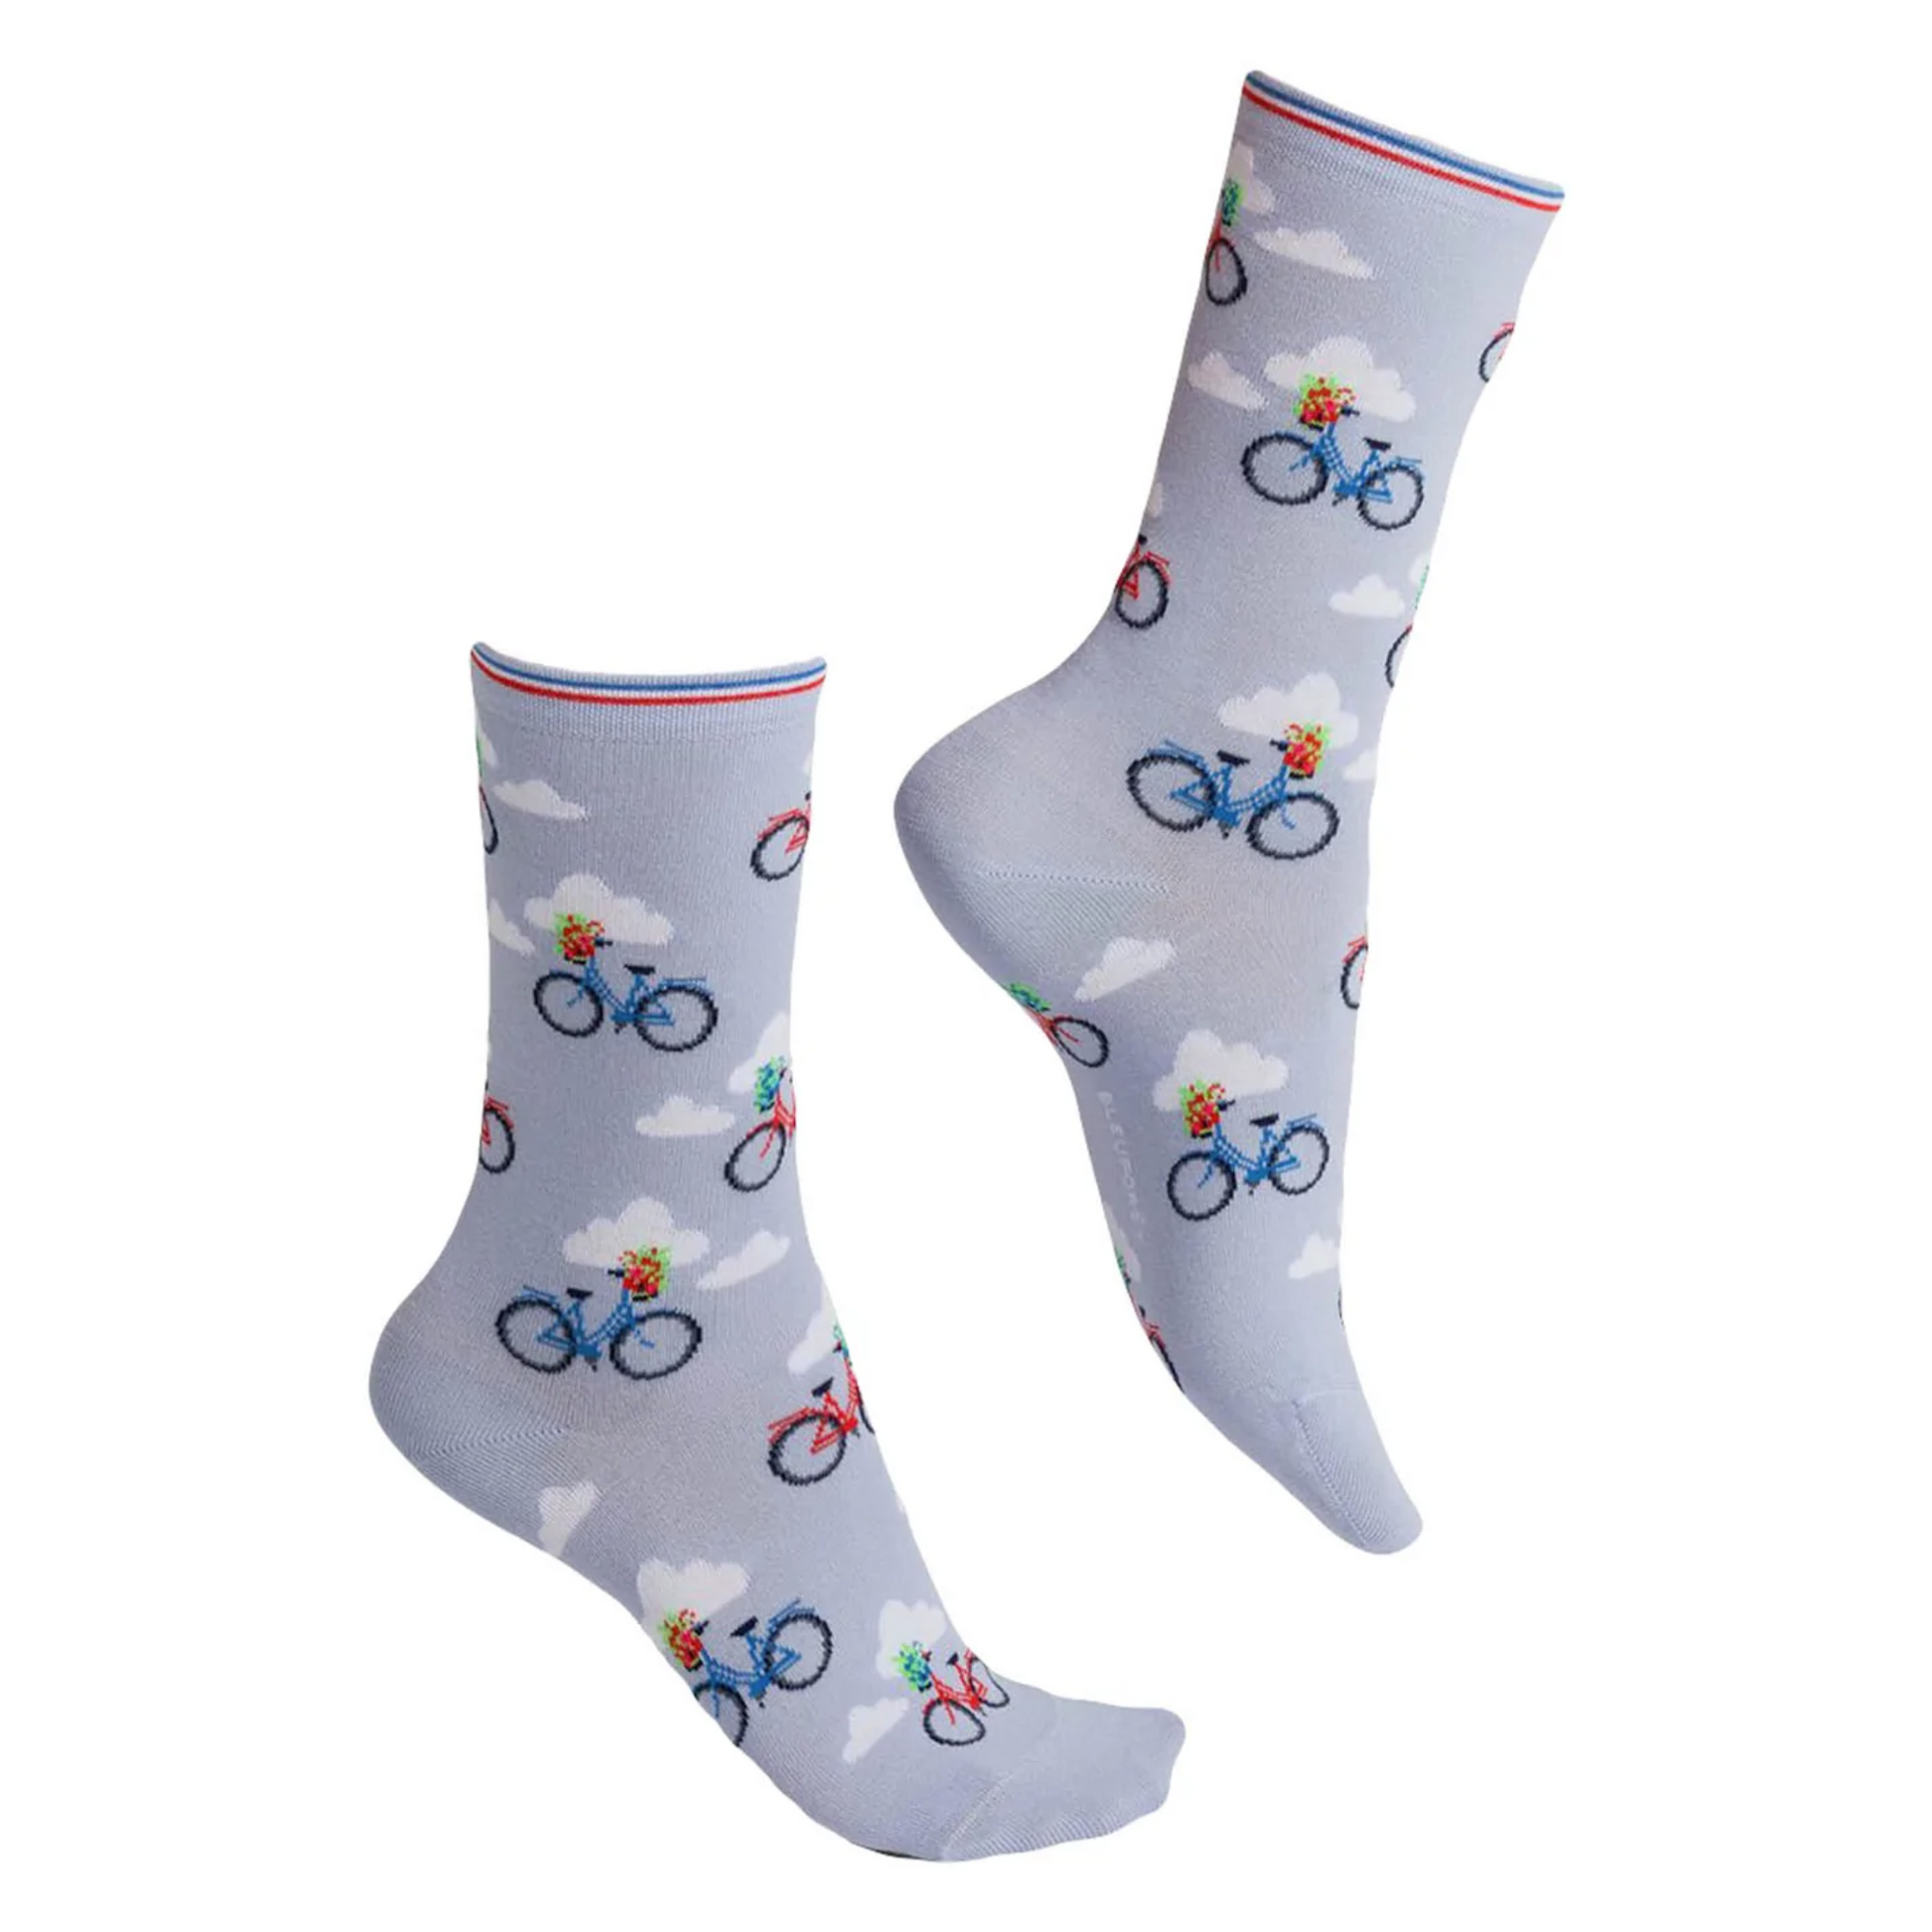 A pair of light blue socks with blue and red bicycles and clouds are pictured.